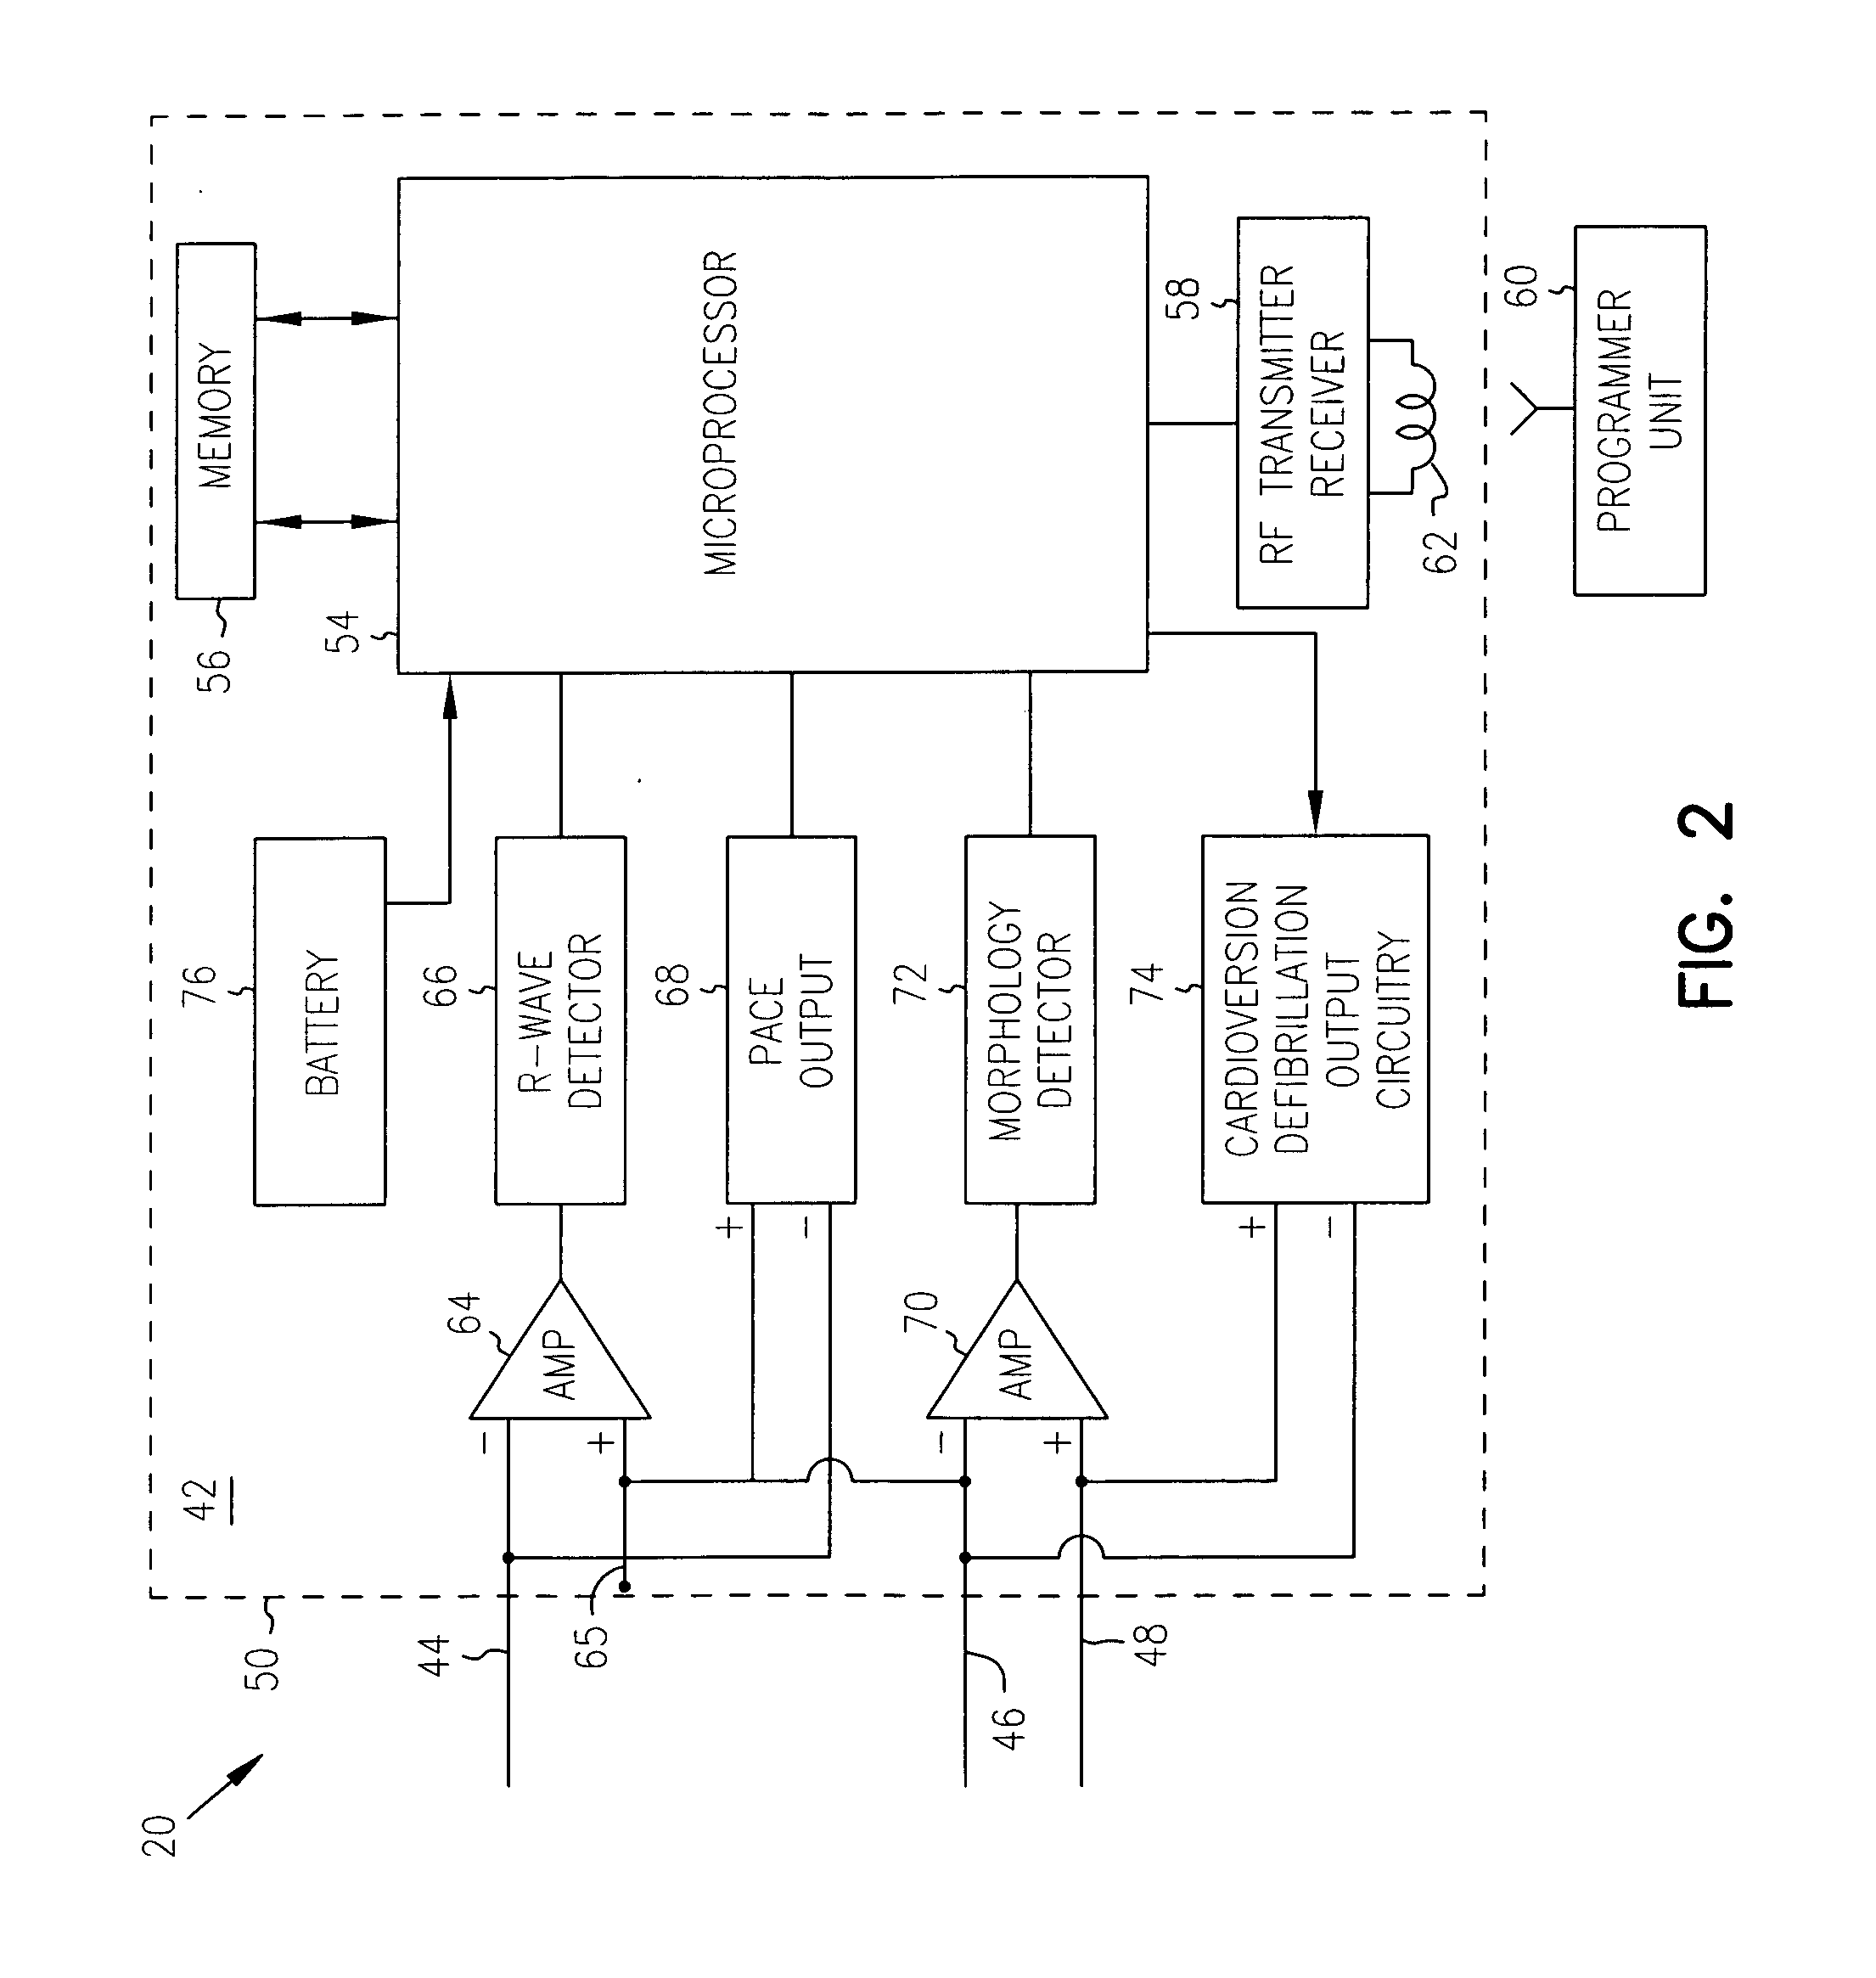 Method and system for identifying and displaying groups of cardiac arrhythmic episodes